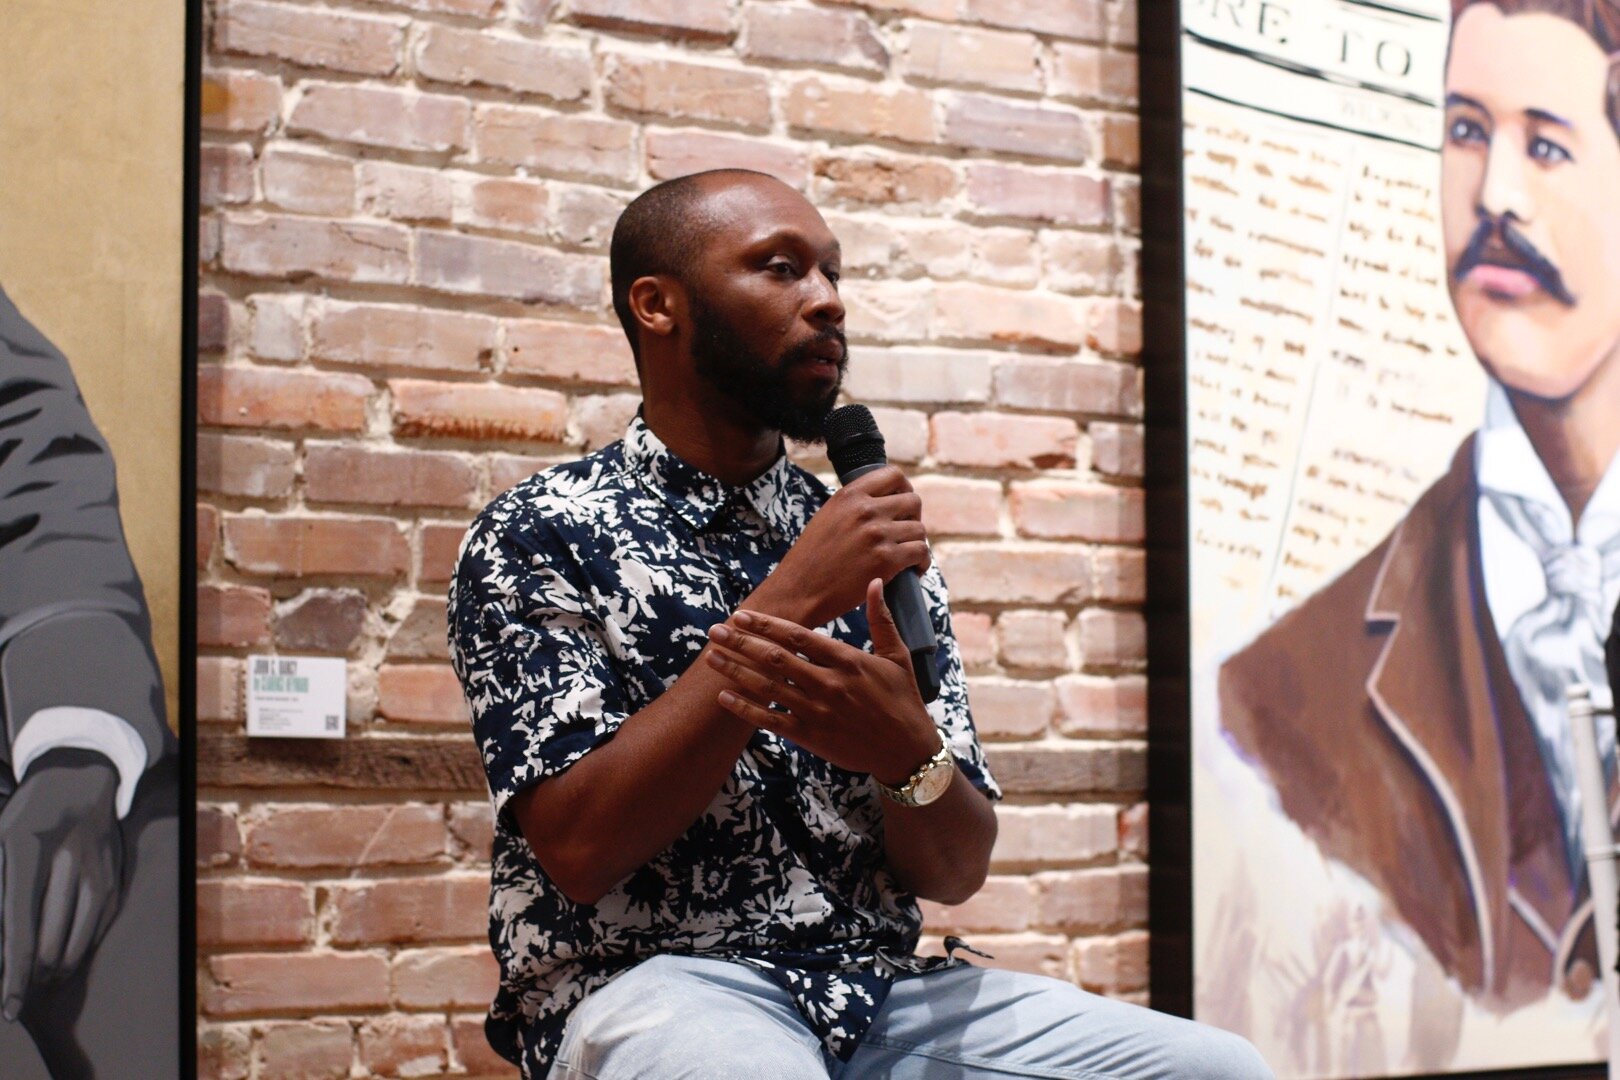  William Paul Thomas during the “Continuum of Change” Artist and Curator Talk.  Photo by Lindy Schoenborn.  